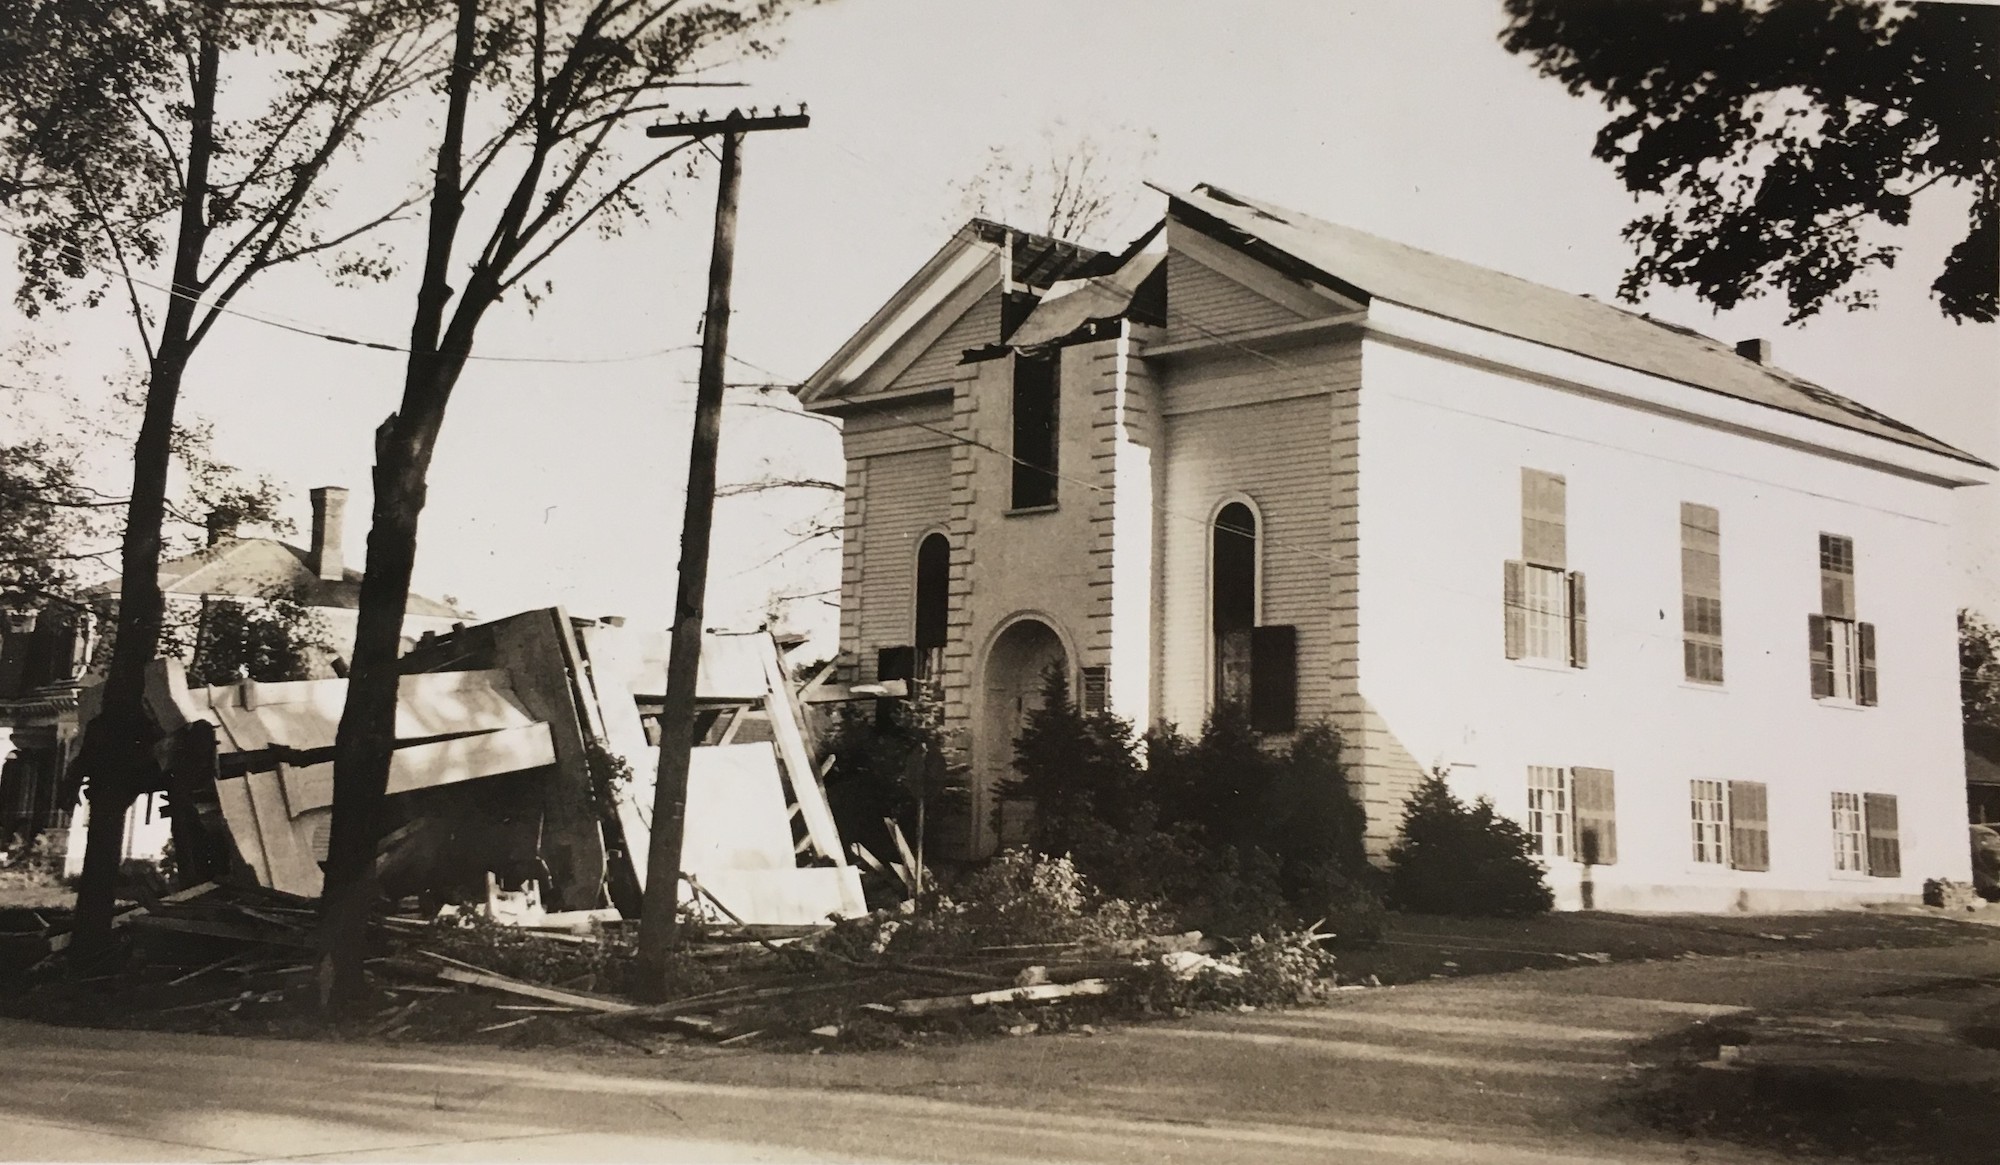 Northborough Historical Society building was once a Baptist church